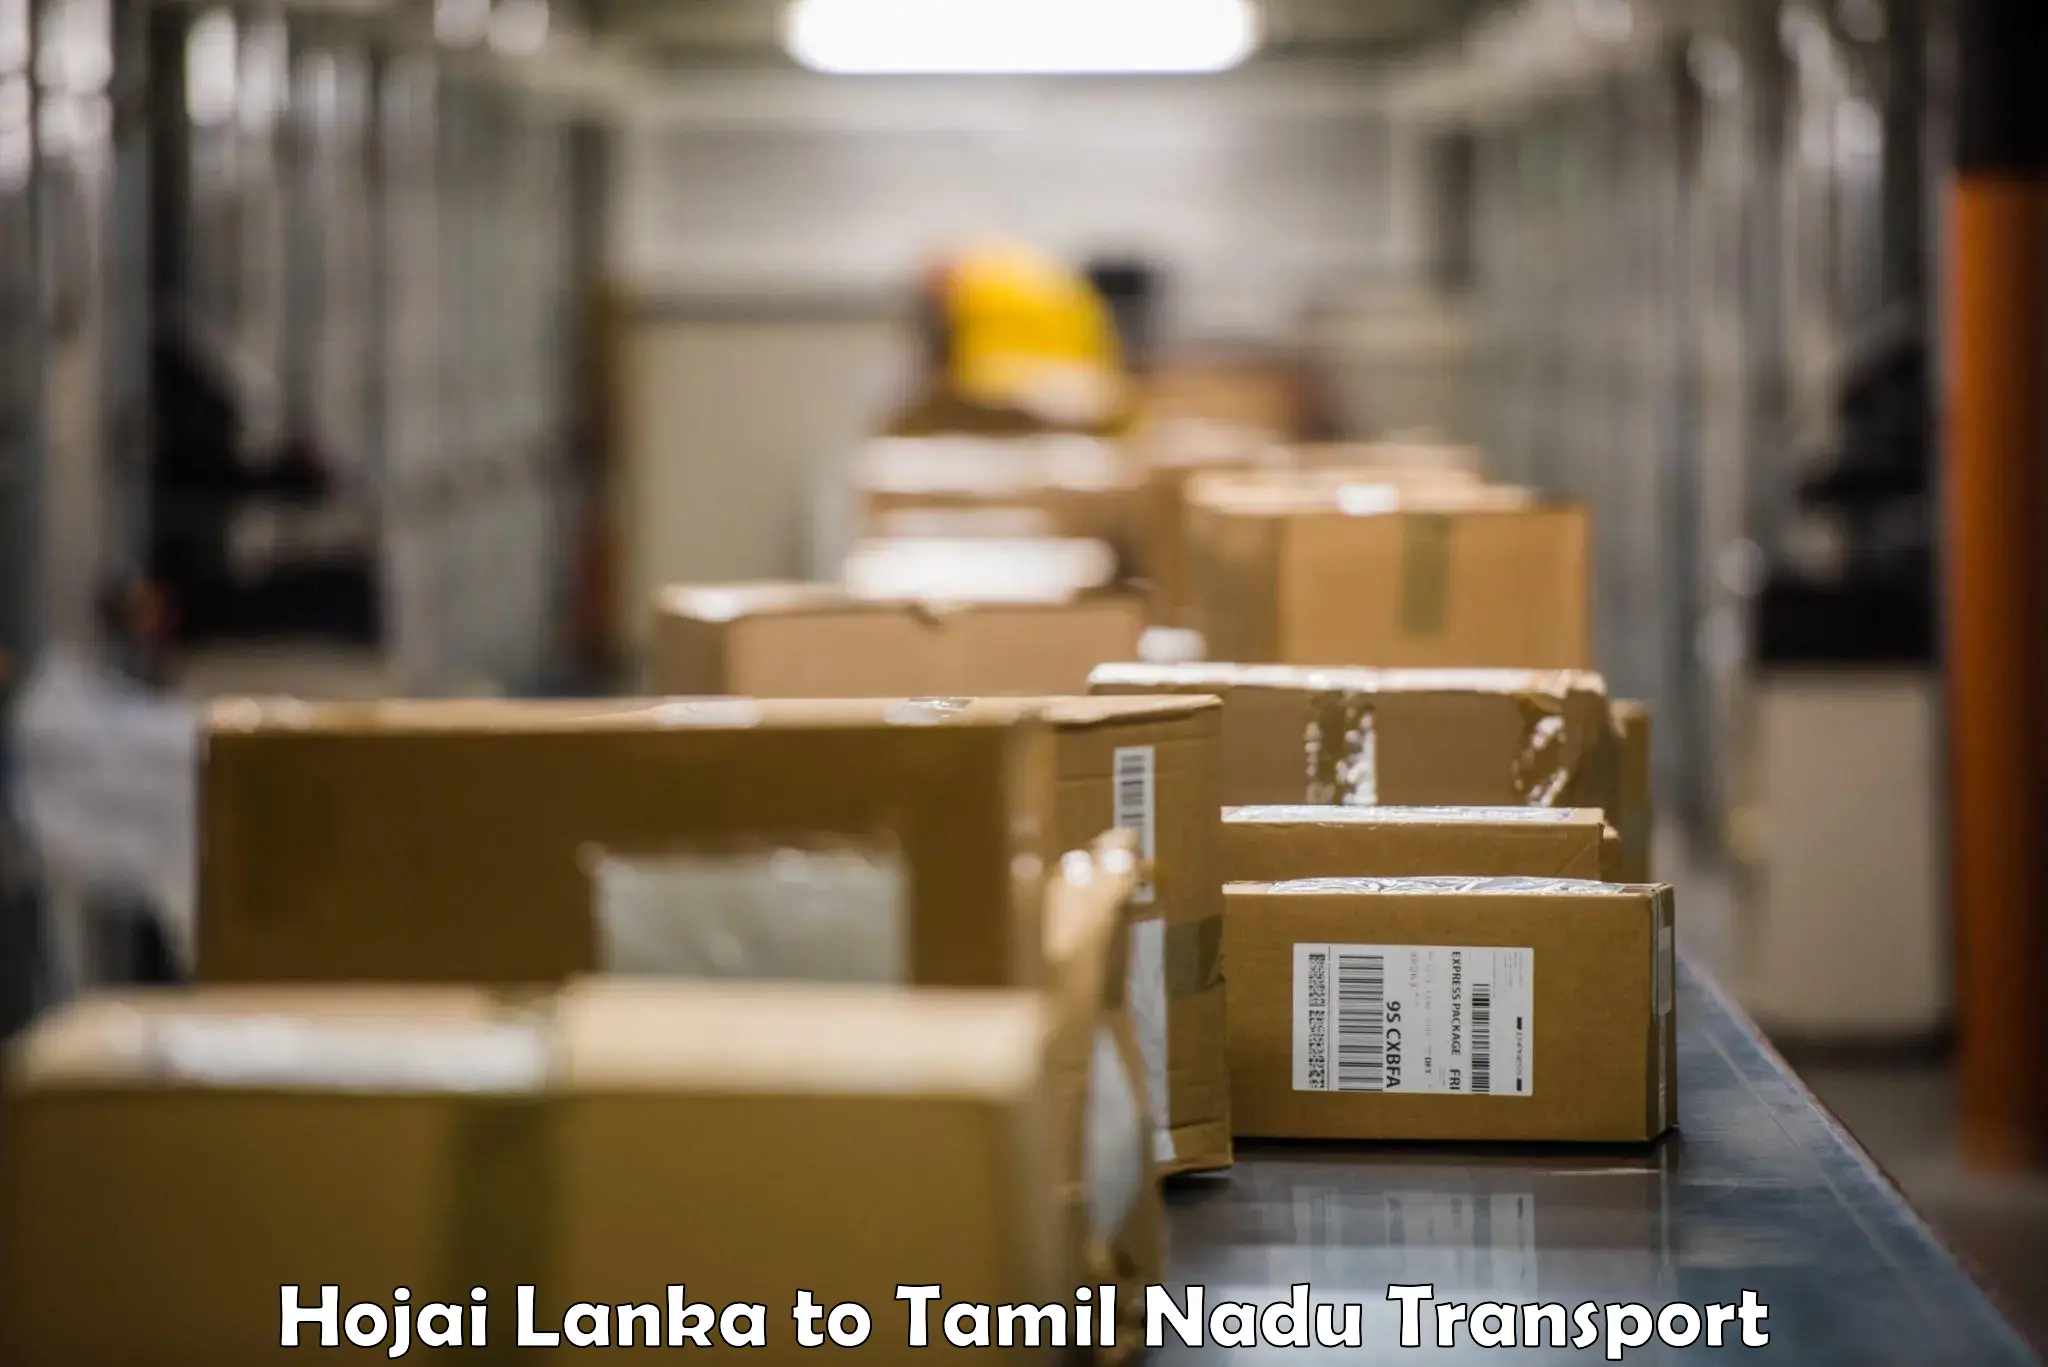 Domestic goods transportation services Hojai Lanka to Sri Ramachandra Institute of Higher Education and Research Chennai